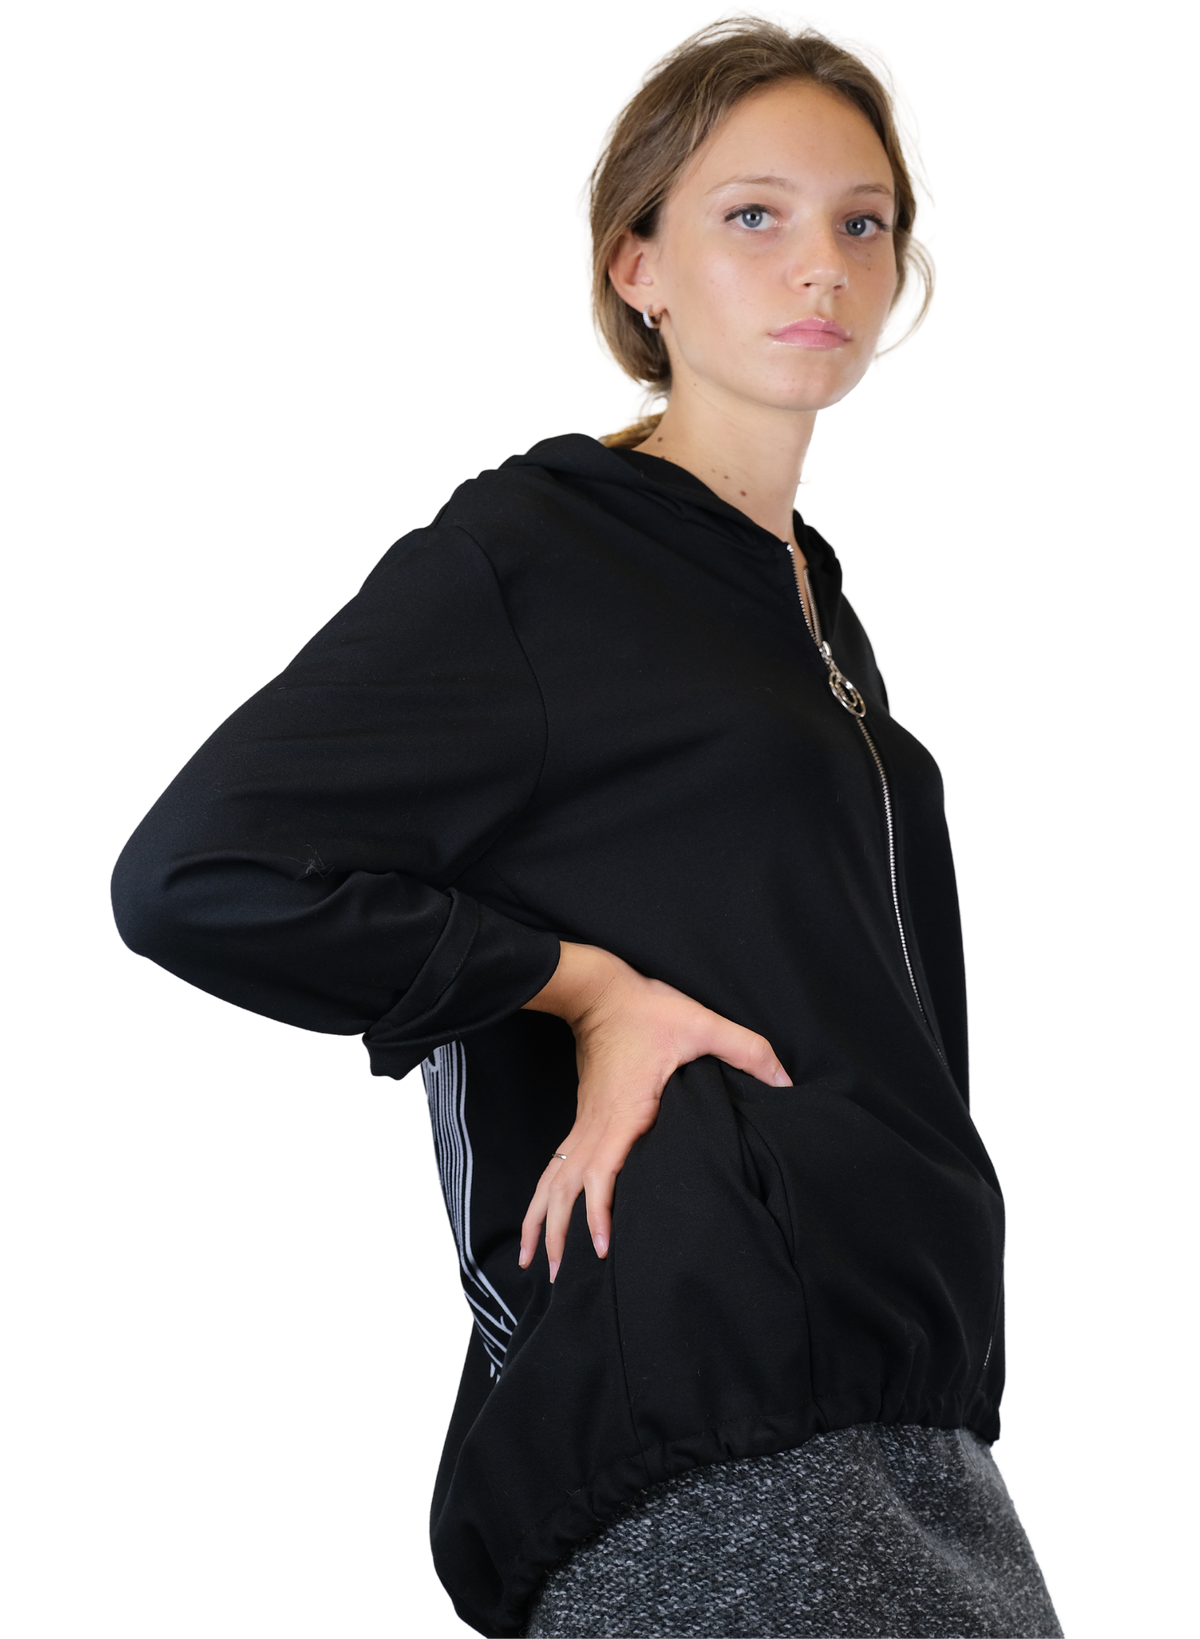 Women's Baggy sweatshirt with printed wings and zipper with jewel cursor